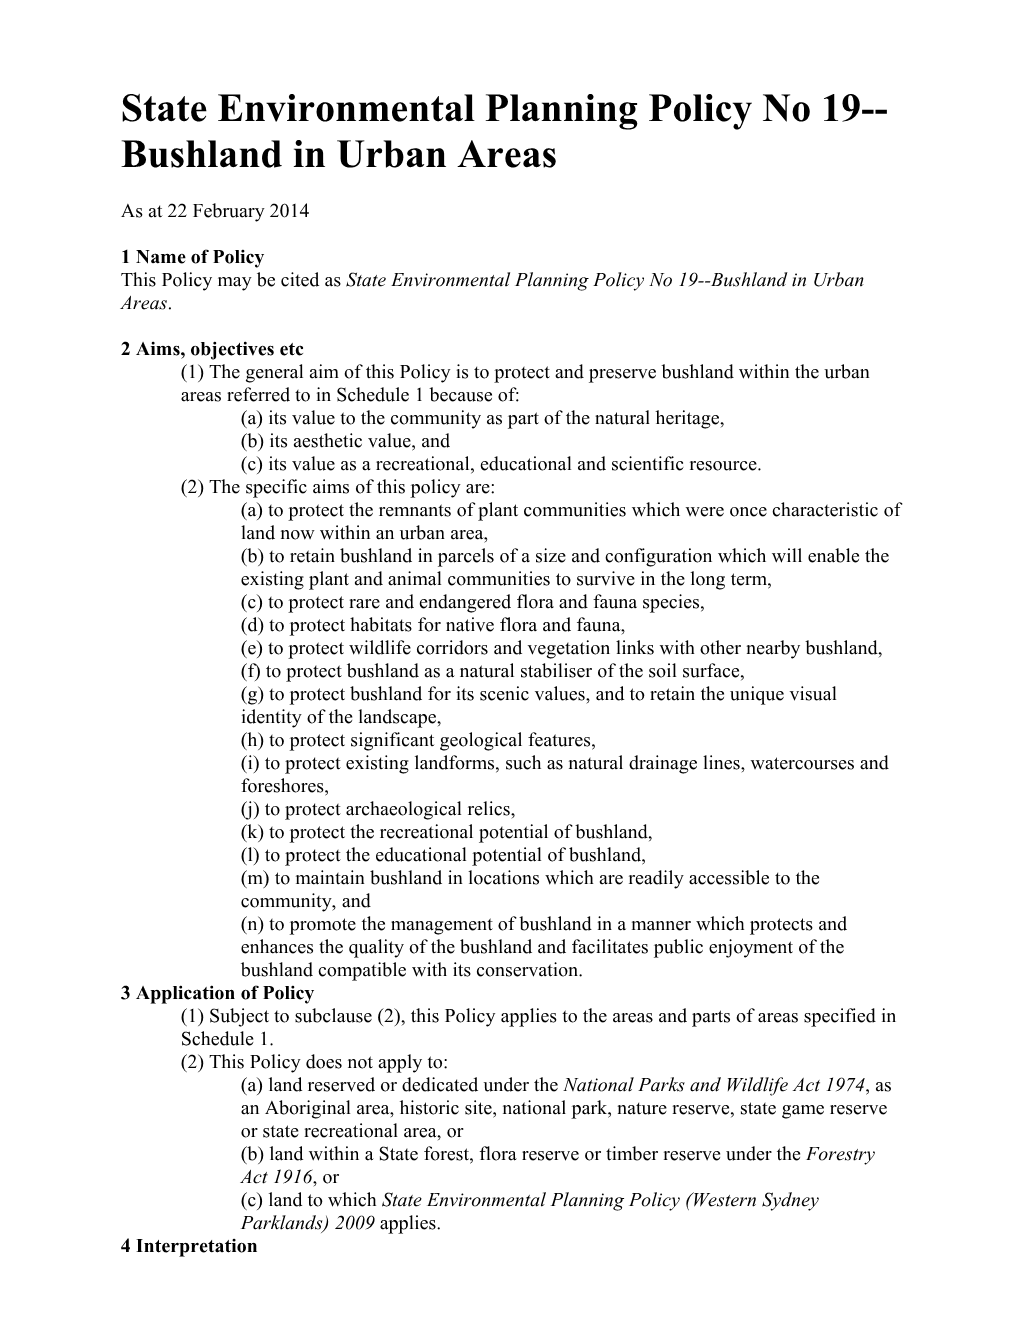 State Environmental Planning Policy No 19 Bushland in Urban Areas